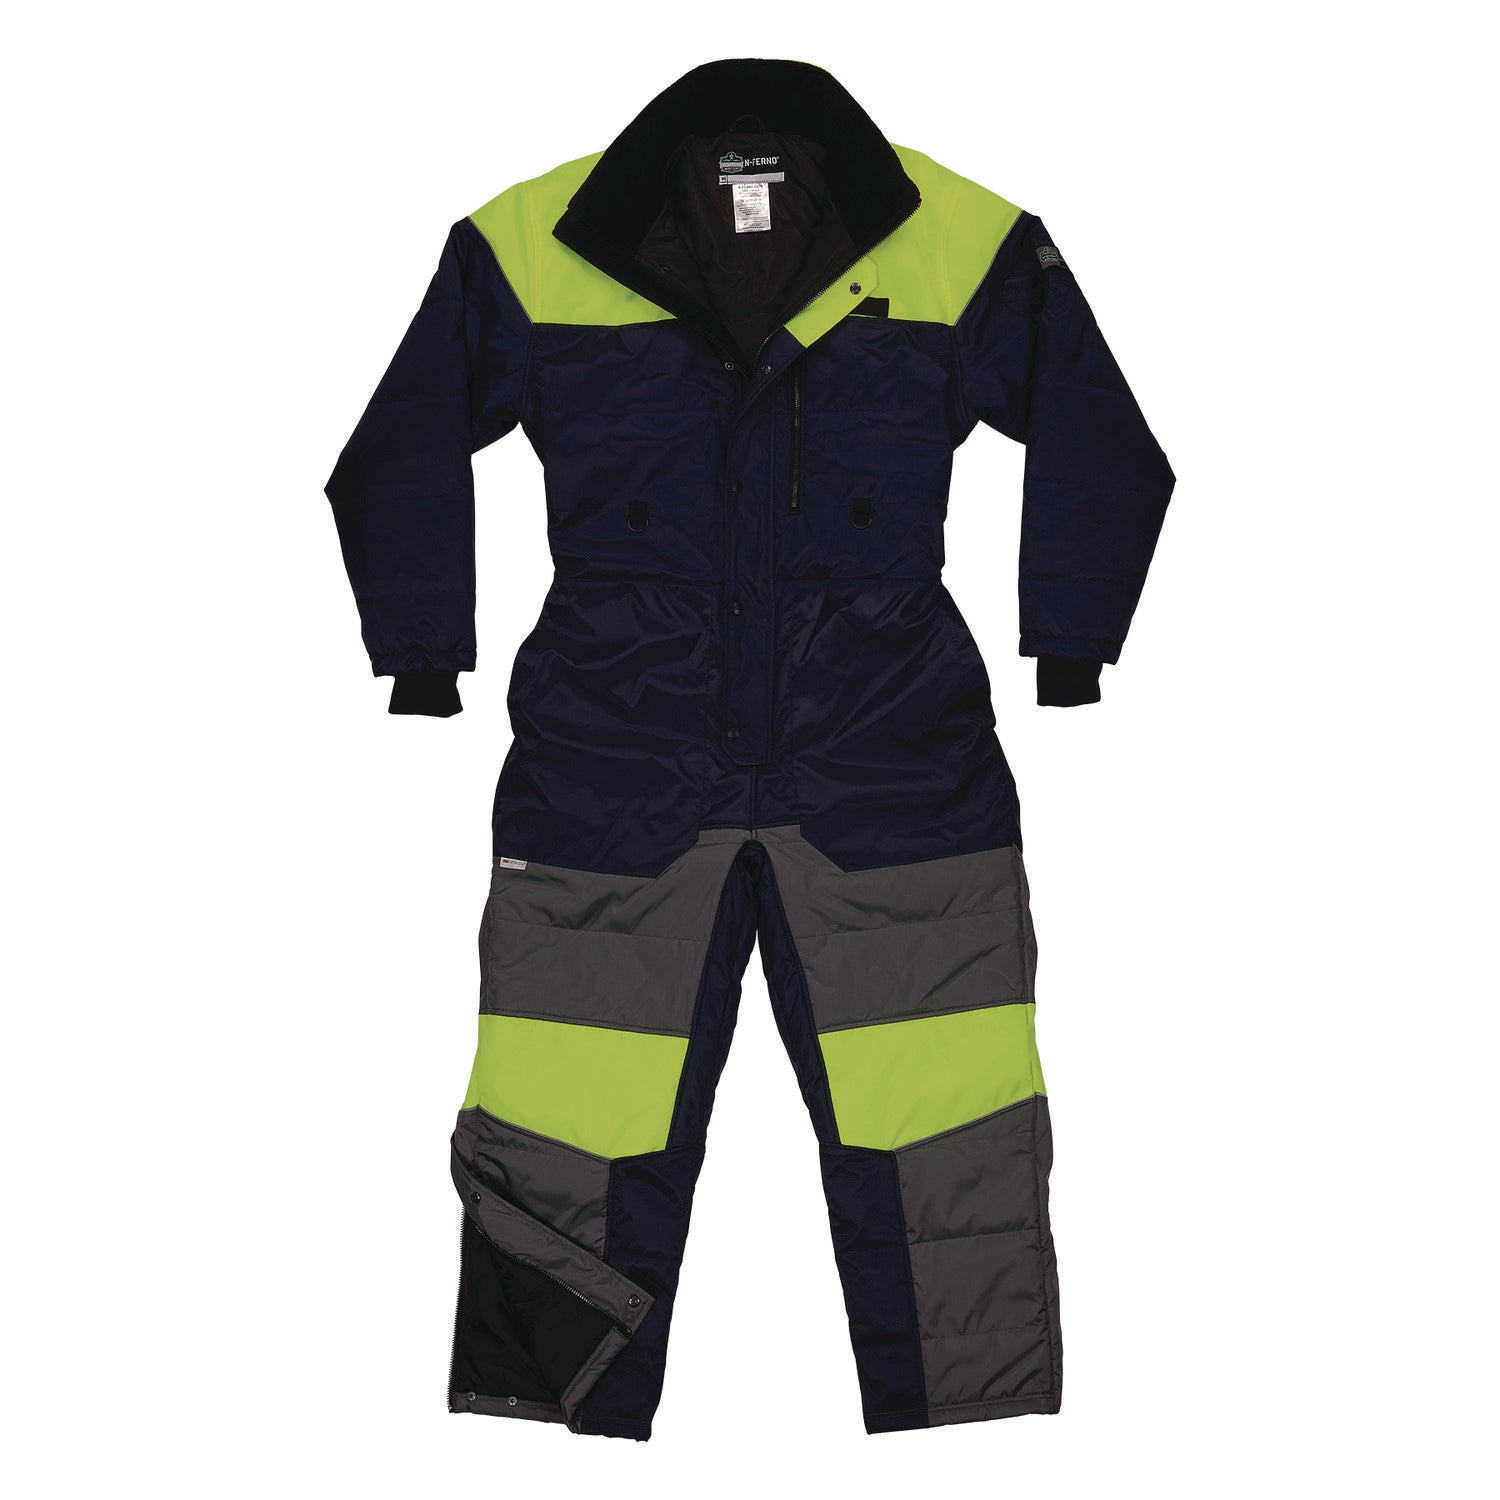 n-ferno-6475-insulated-freezer-coverall-small-navy-ships-in-1-3-business-days_ego41242 - 1